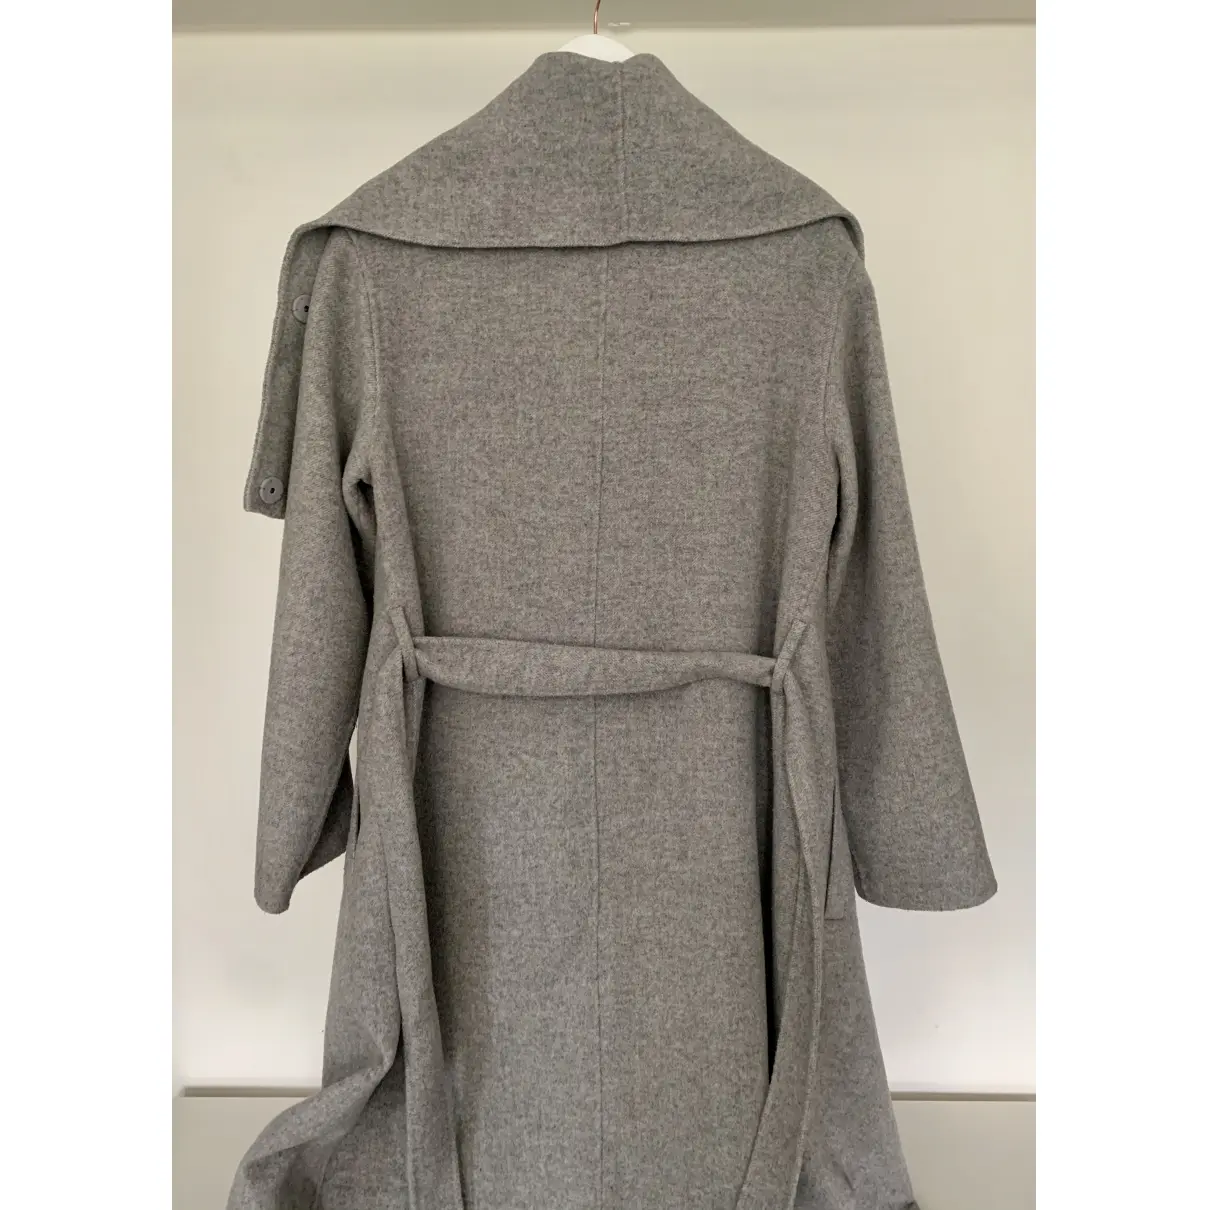 Eudon Choi Wool coat for sale